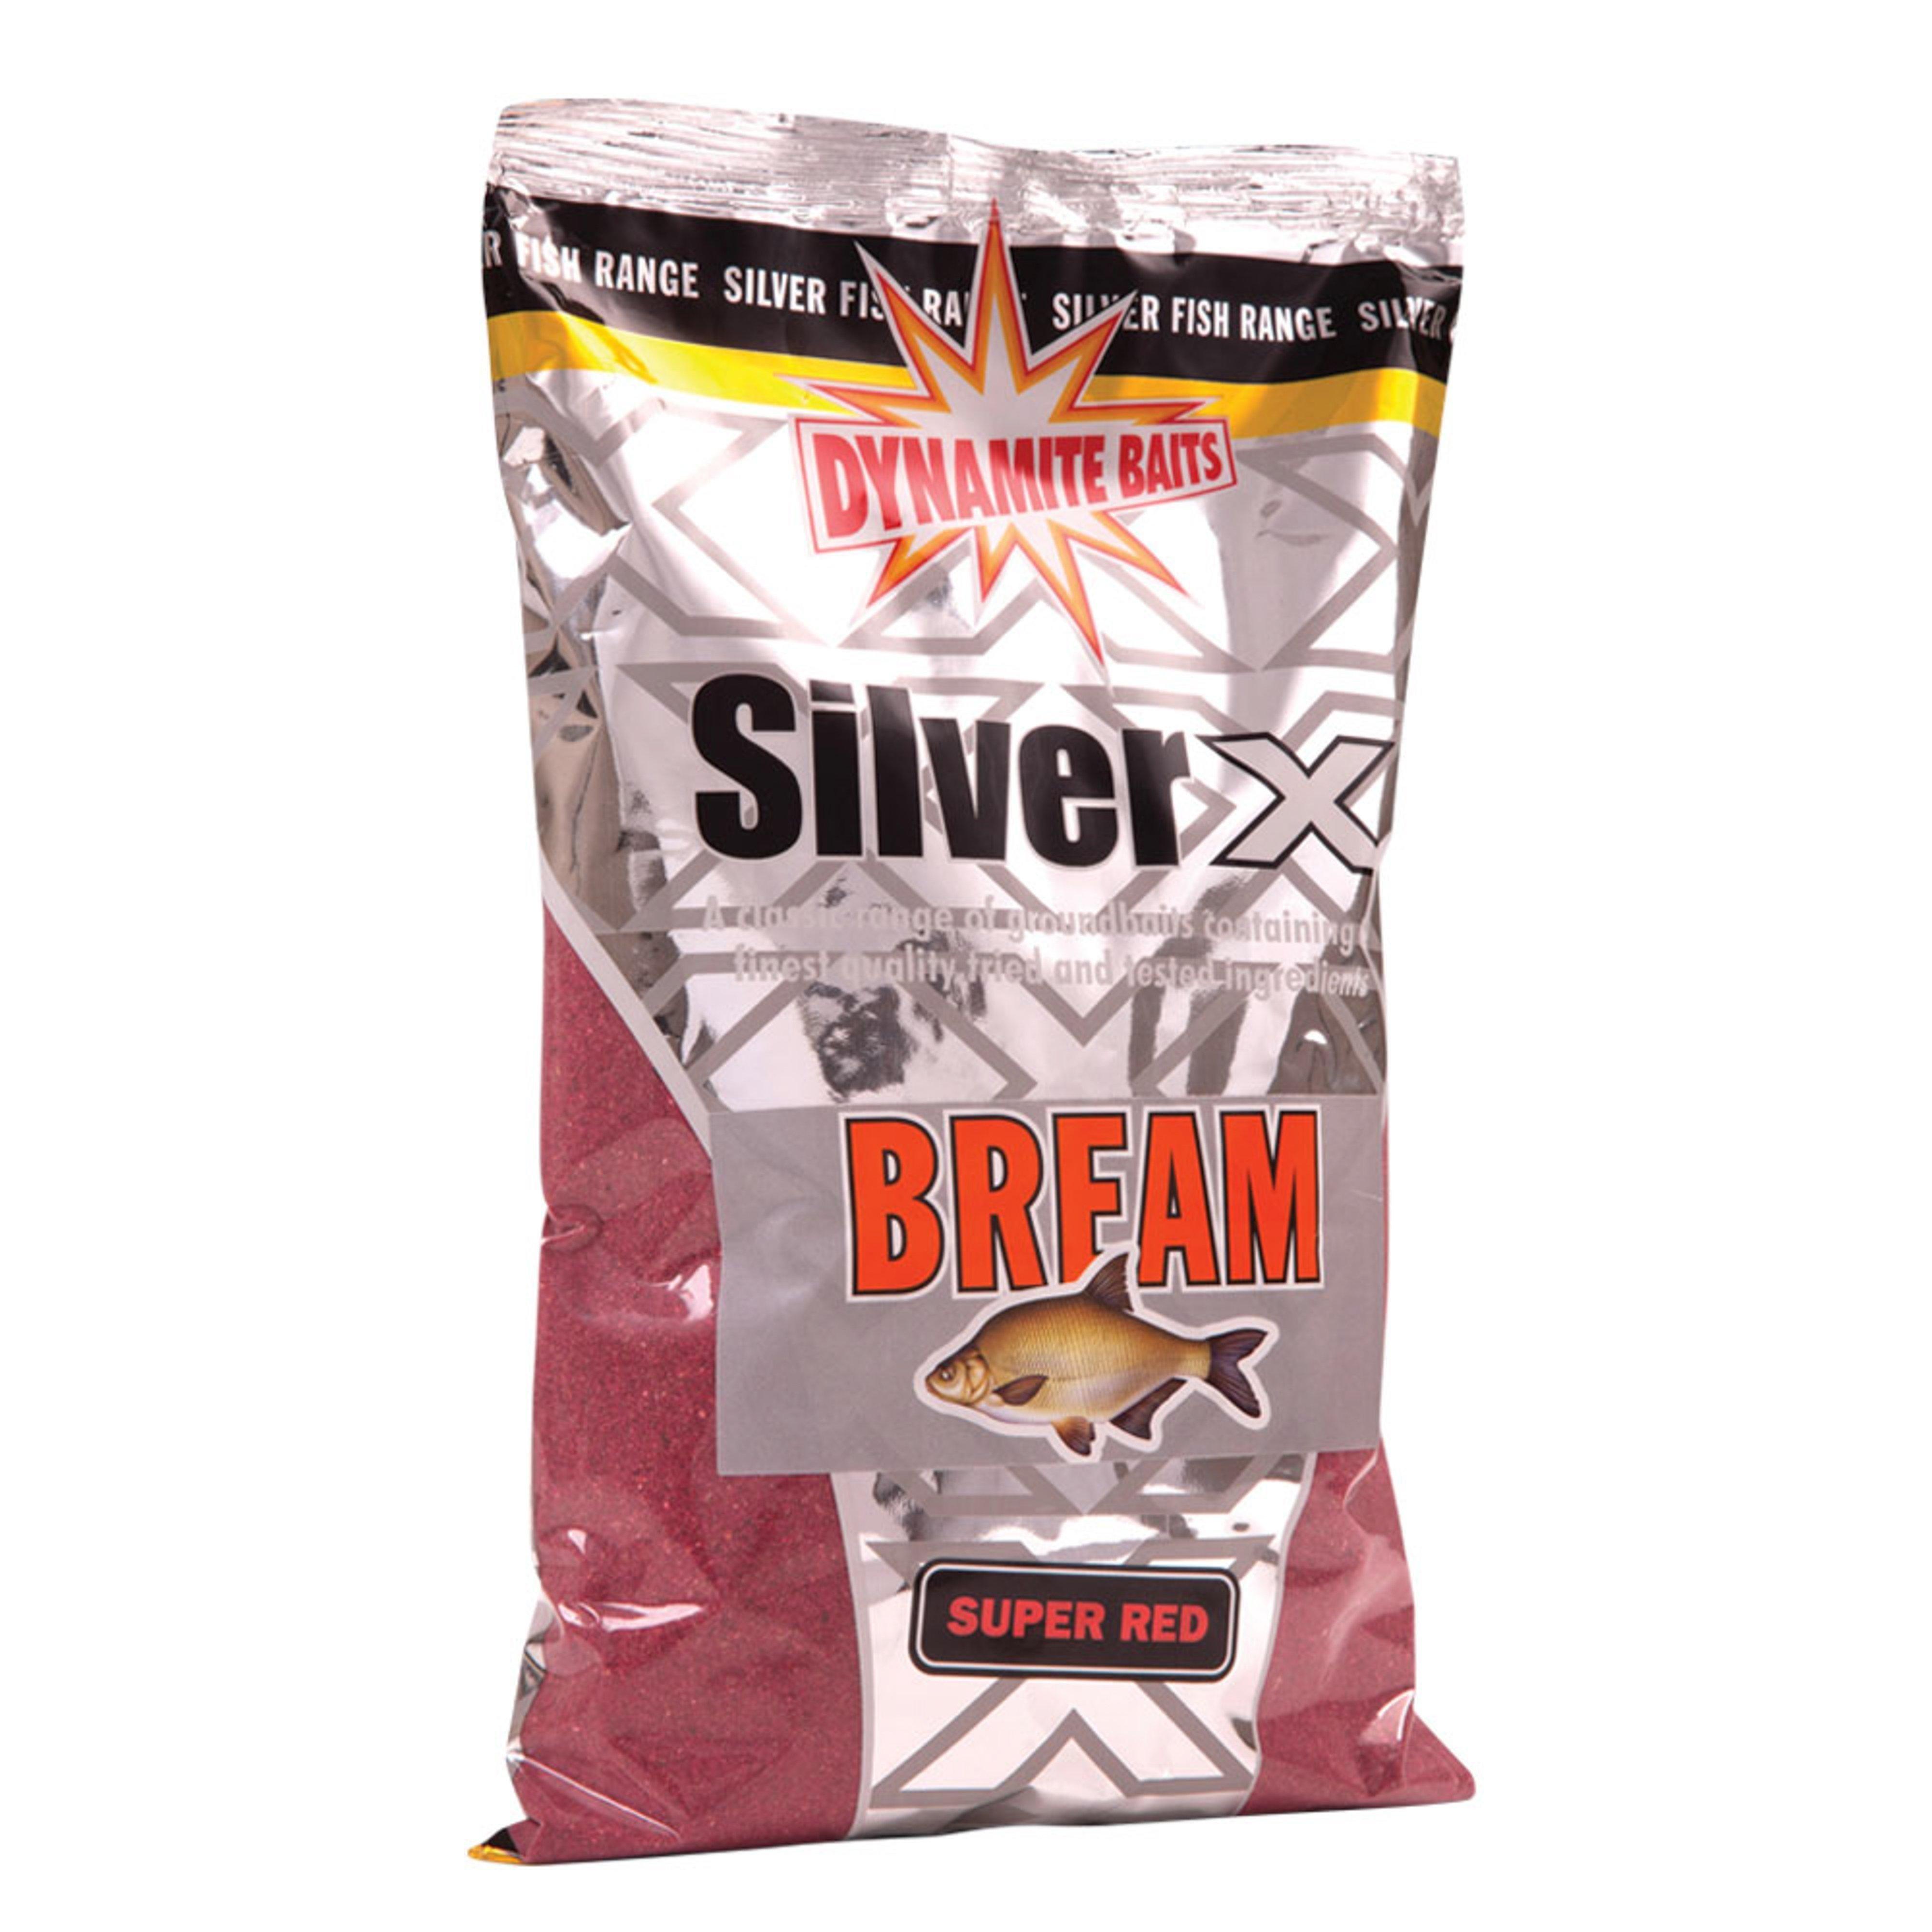 Dynamite Silver X Bream Super Red Fishing Match Bait Review